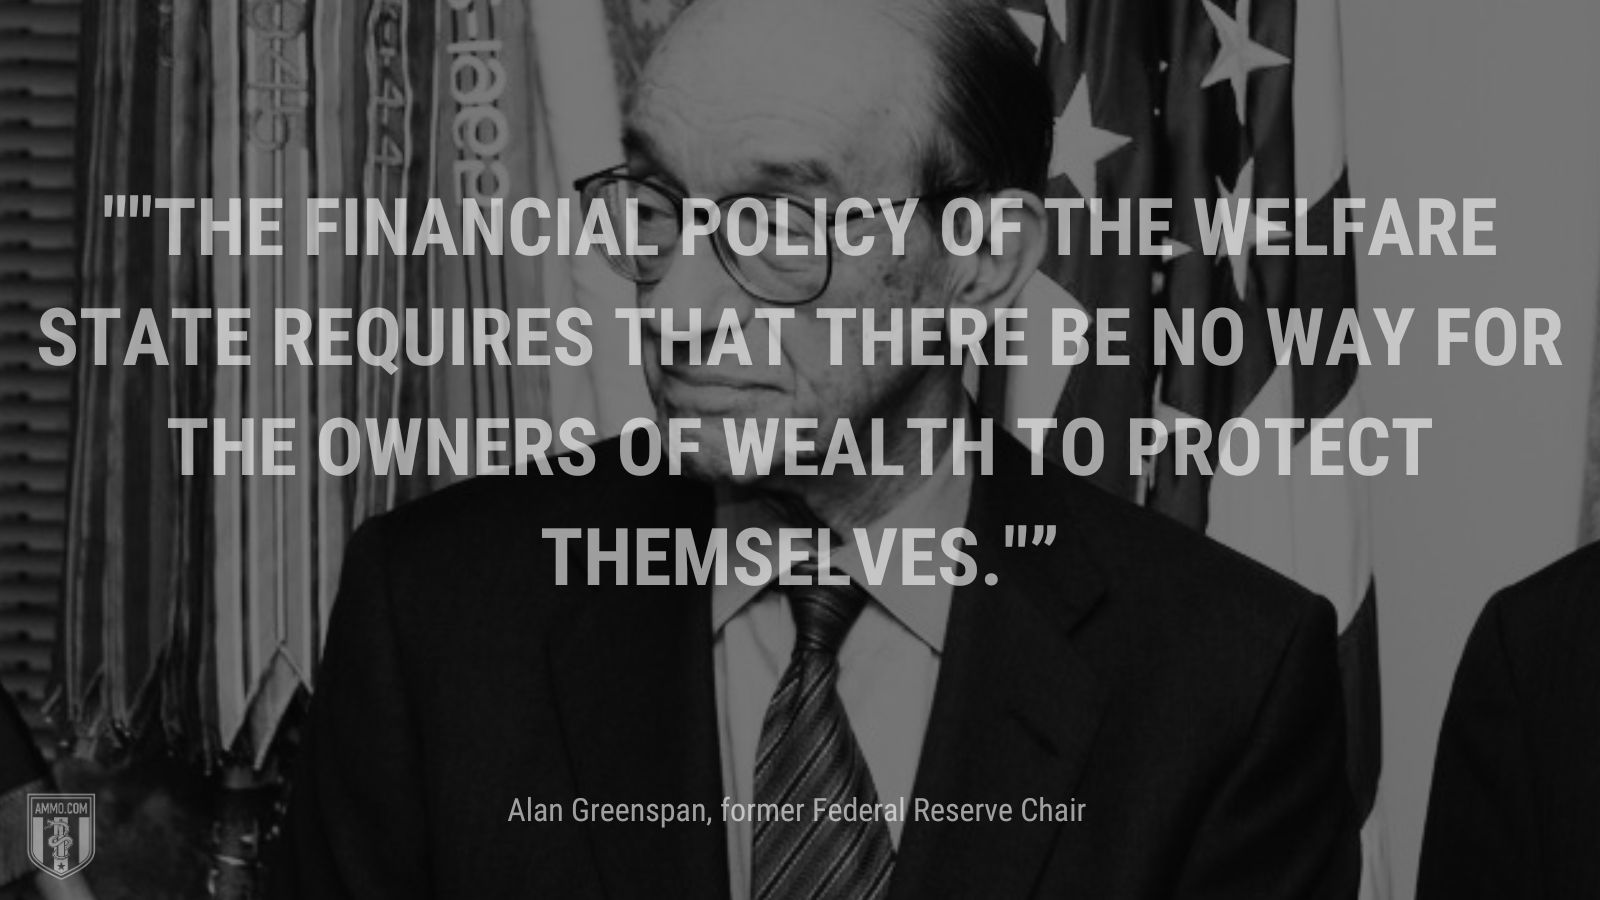 “The financial policy of the welfare state requires that there be no way for the owners of wealth to protect themselves.” - Alan Greenspan, former Federal Reserve Chair